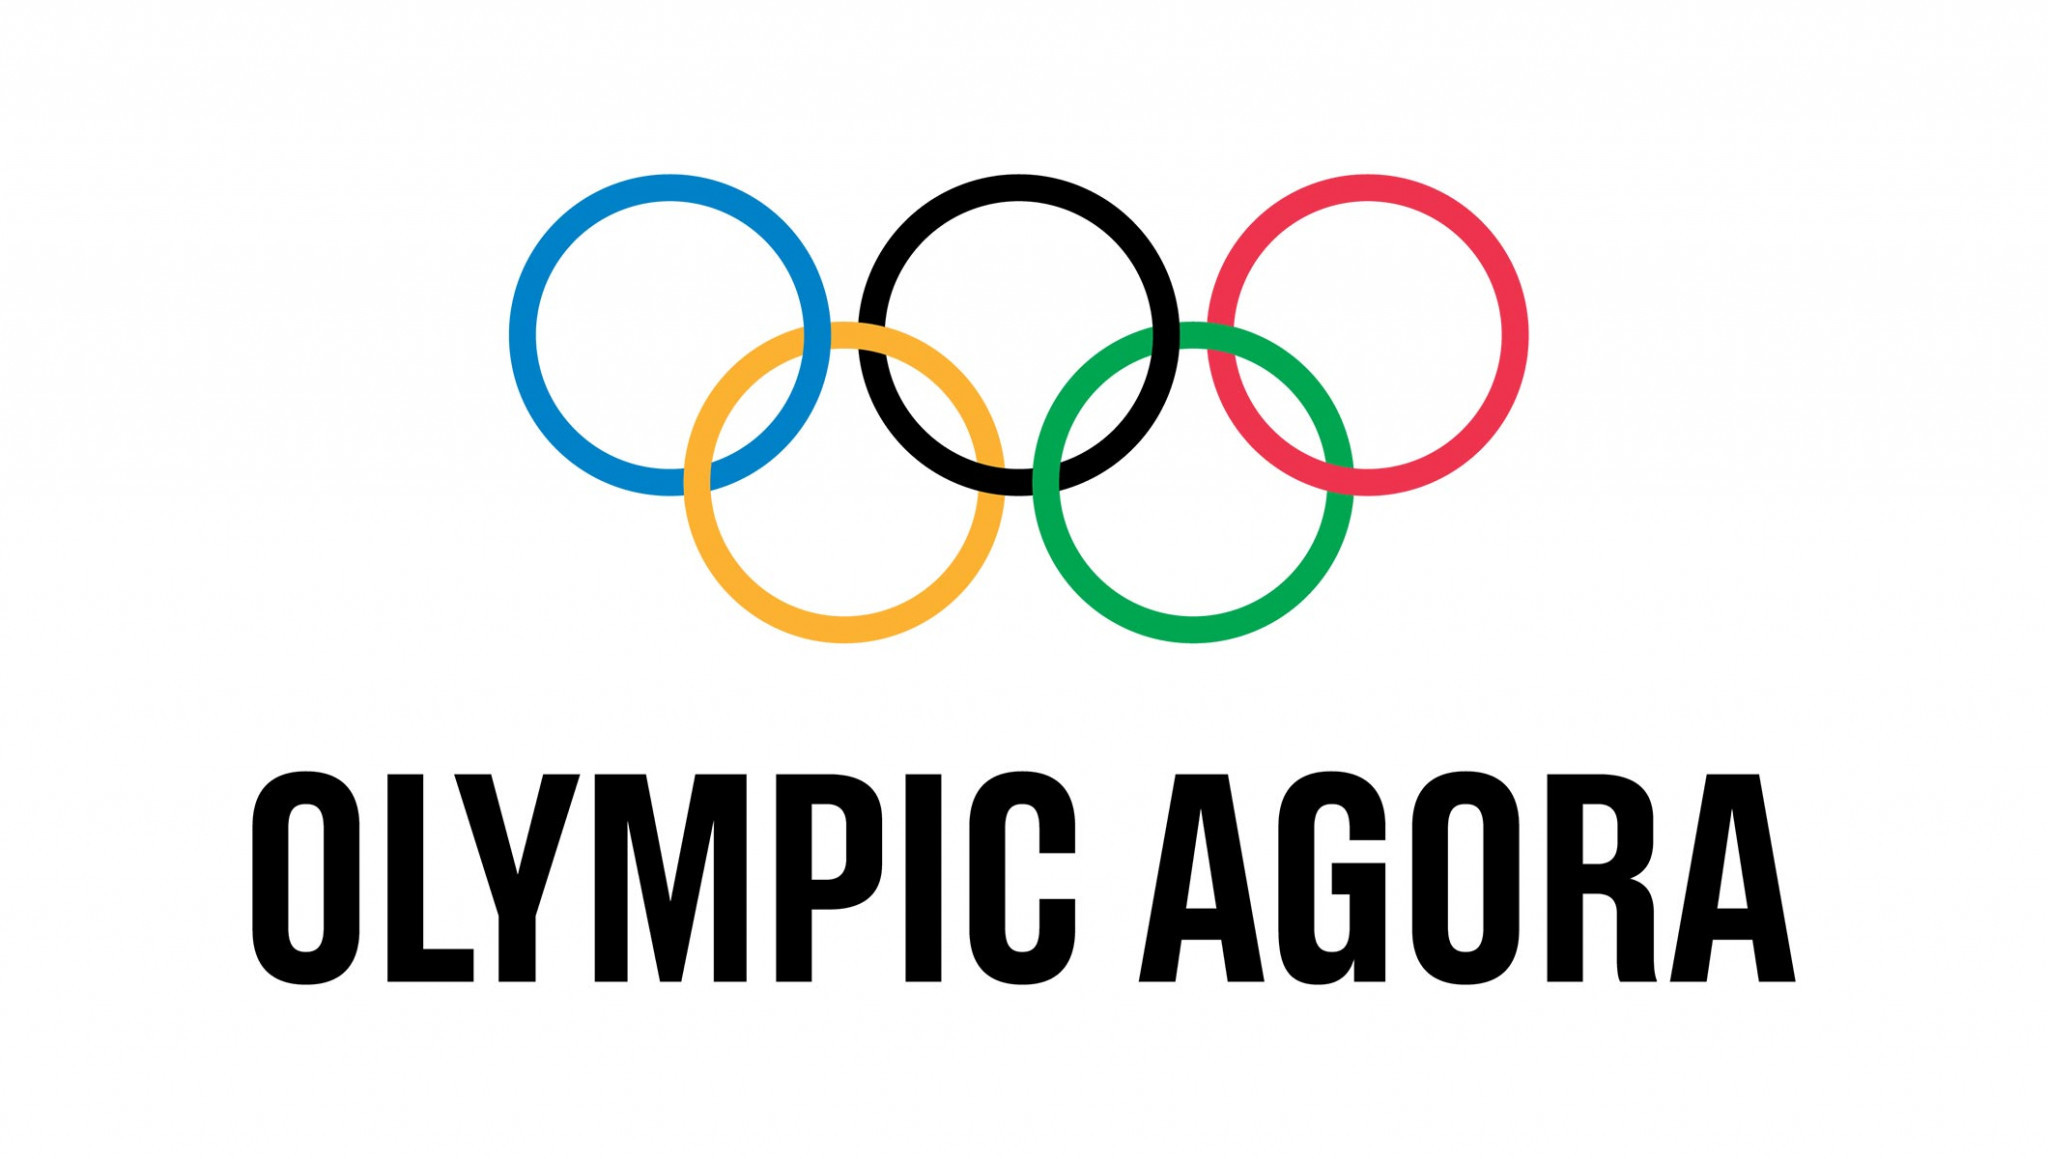 First Olympic Agora to be held in Tokyo